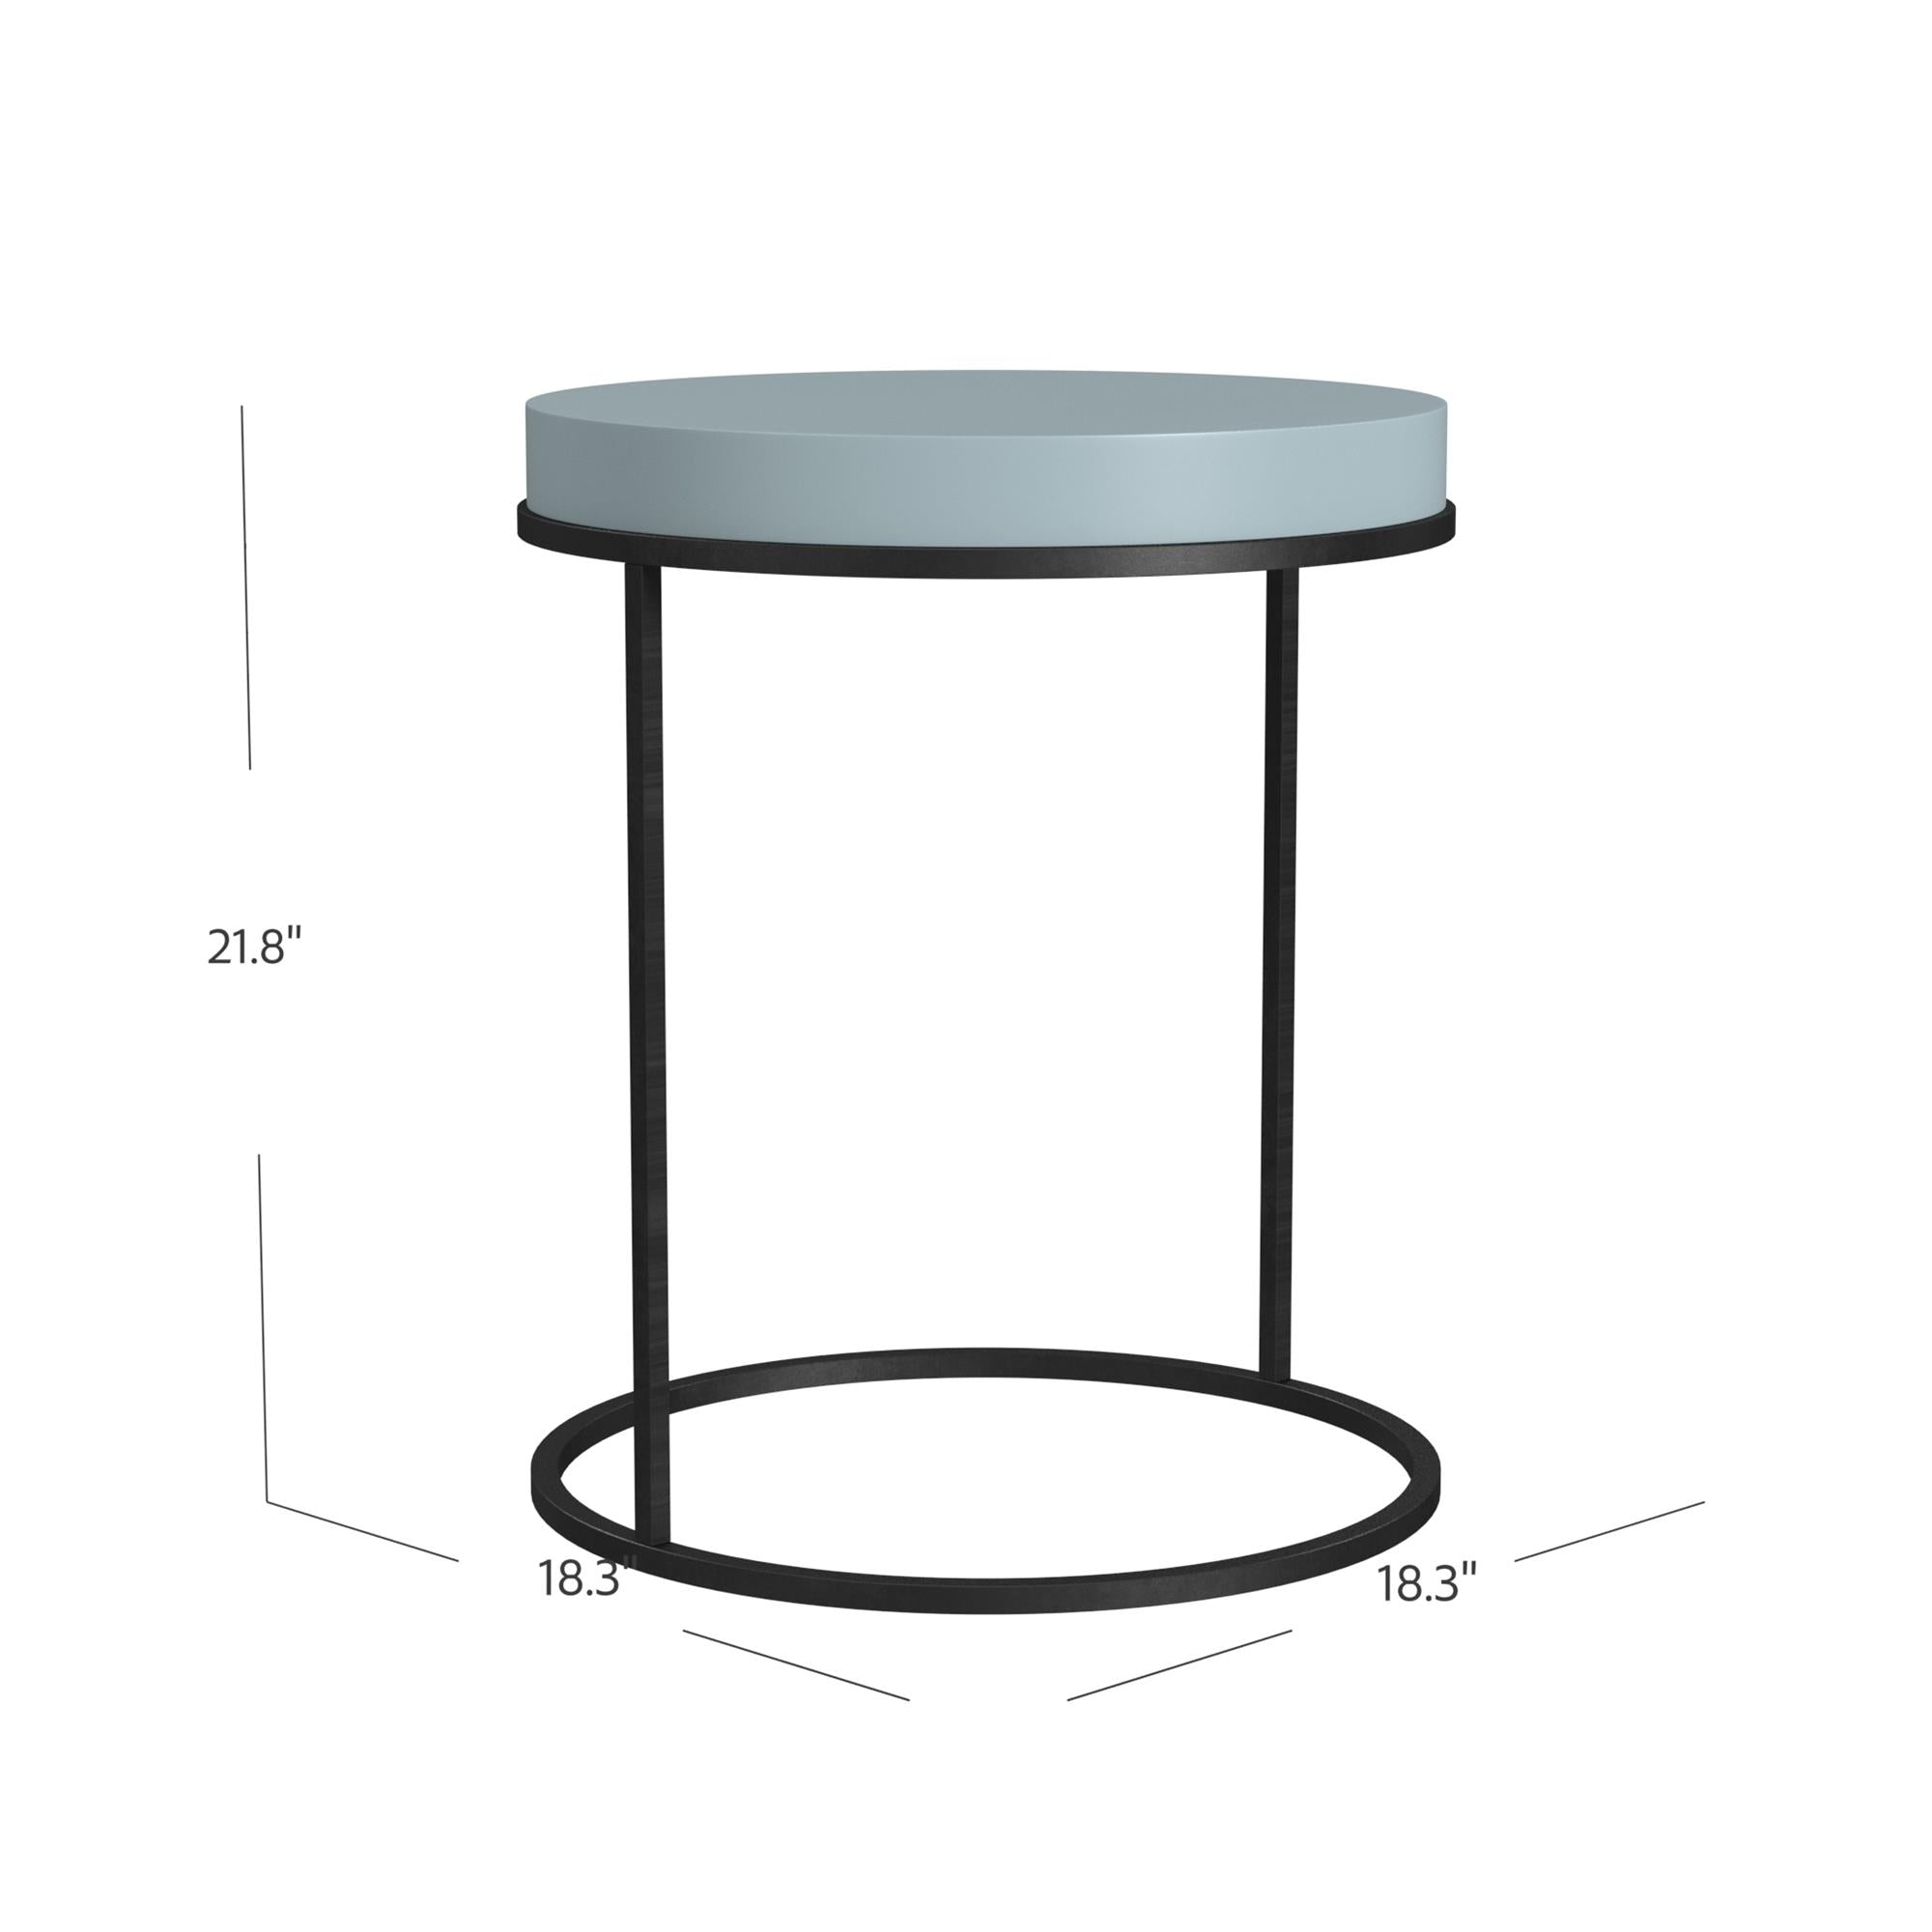 The Village Perry Round Accent Table, Powder Blue - Powder Blue